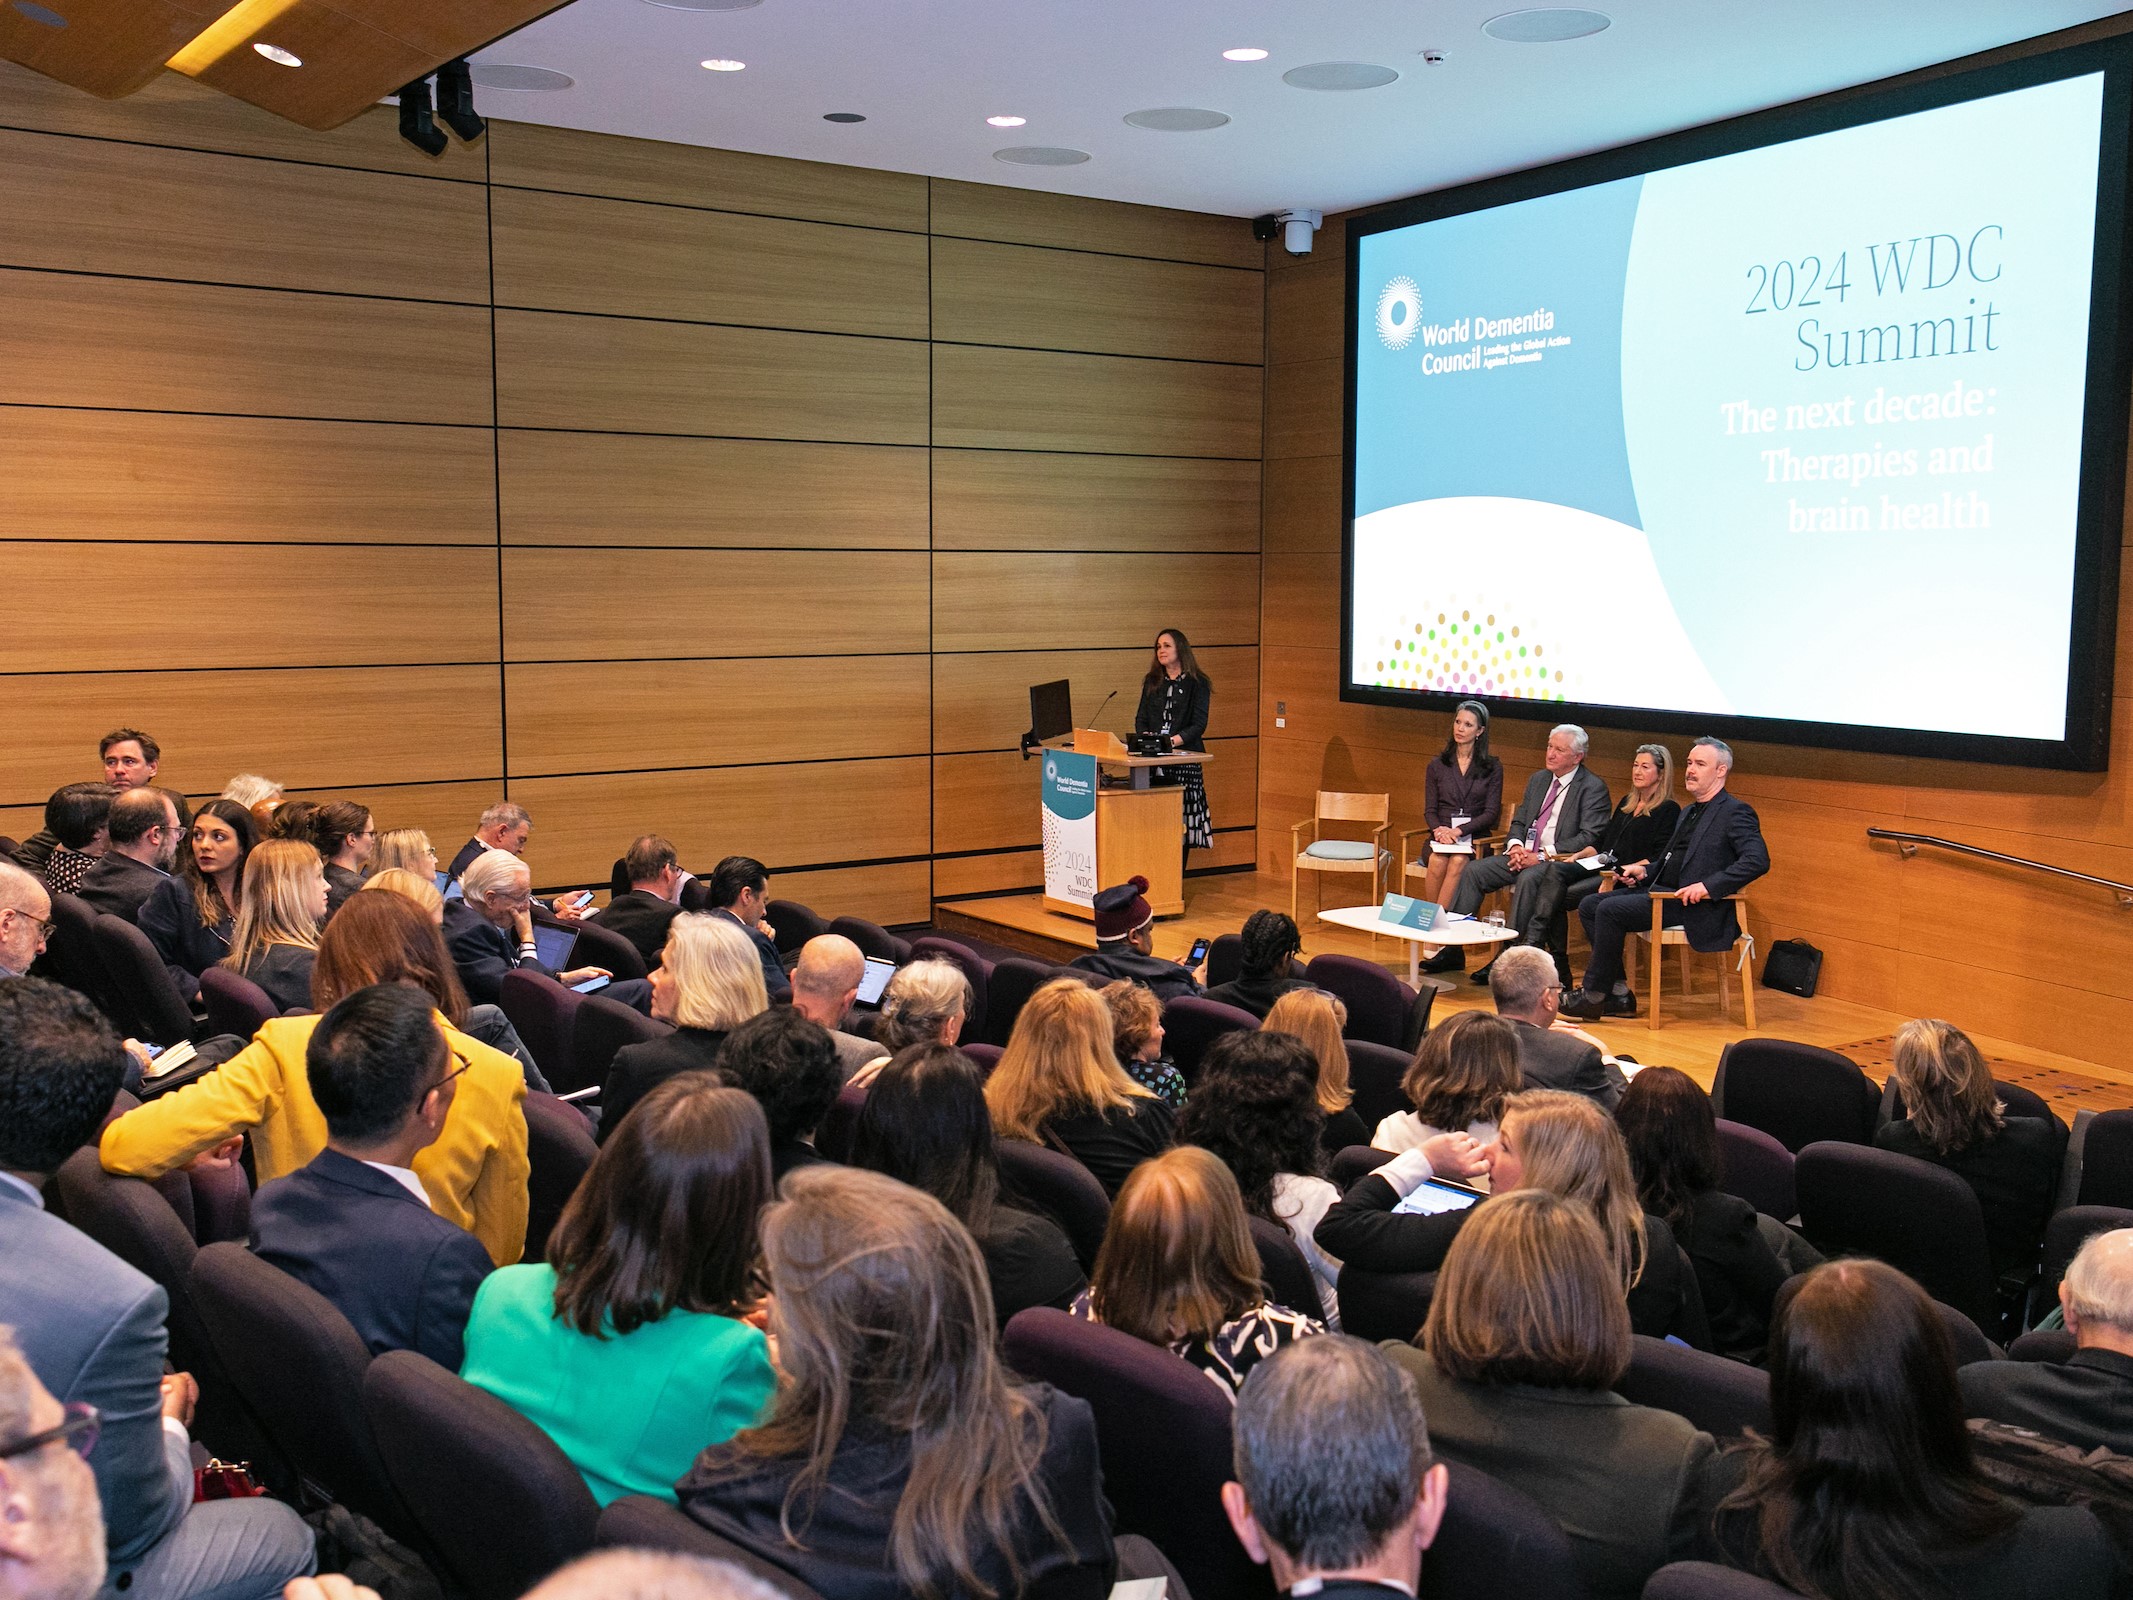 [Lecture Report] The World Dementia Council “WDC Summit 2024” (March 26, 2024, London, England)